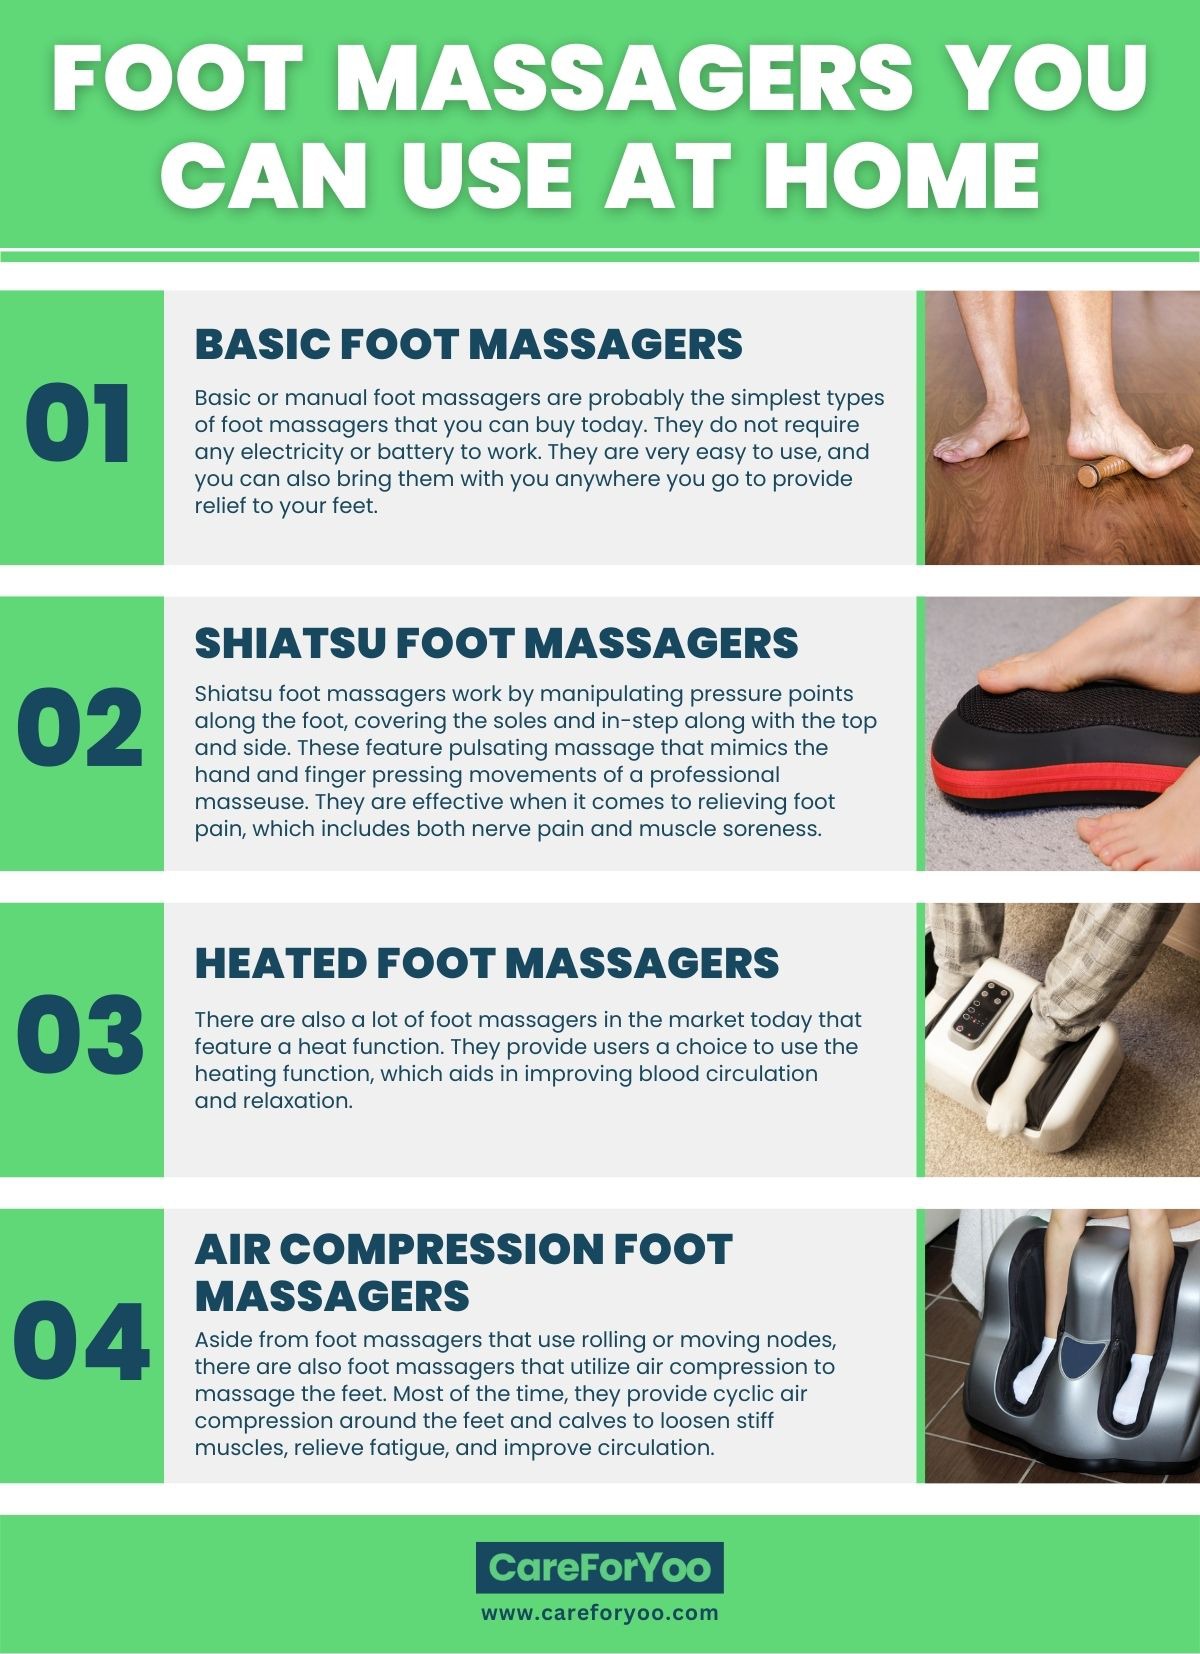 Foot Massagers You Can Use at Home